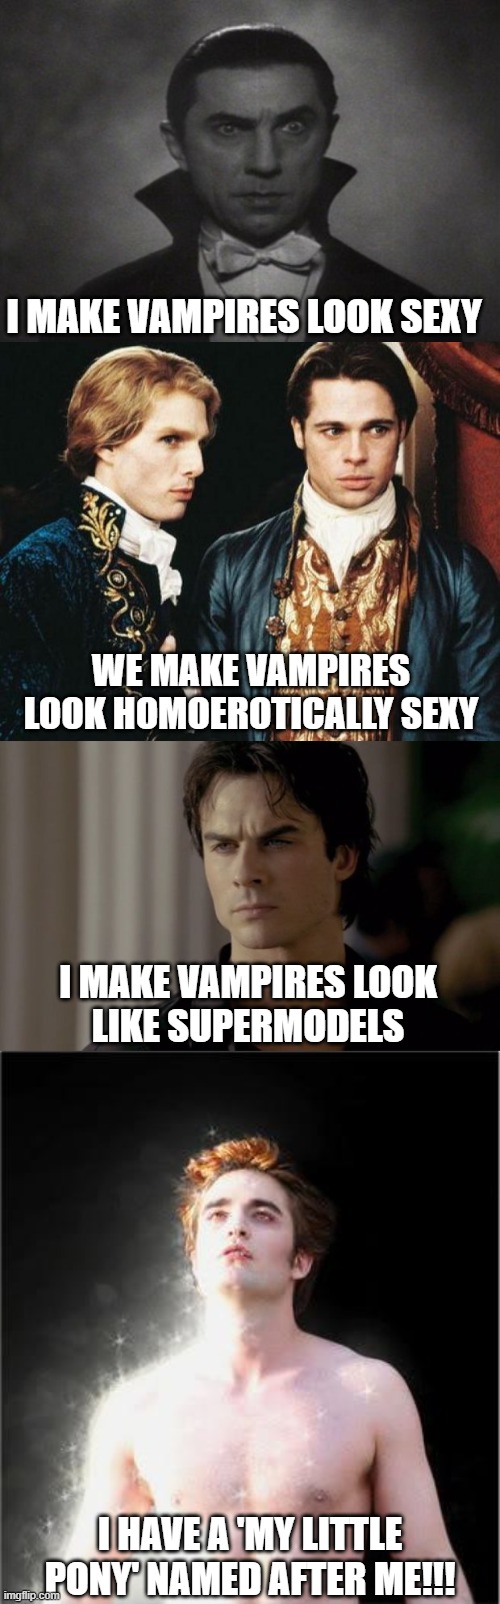 I MAKE VAMPIRES LOOK SEXY; WE MAKE VAMPIRES LOOK HOMOEROTICALLY SEXY; I MAKE VAMPIRES LOOK
LIKE SUPERMODELS; I HAVE A 'MY LITTLE PONY' NAMED AFTER ME!!! | image tagged in og vampire,interview vampire,clash of kings vampire diaries,edward cullen sparkle | made w/ Imgflip meme maker